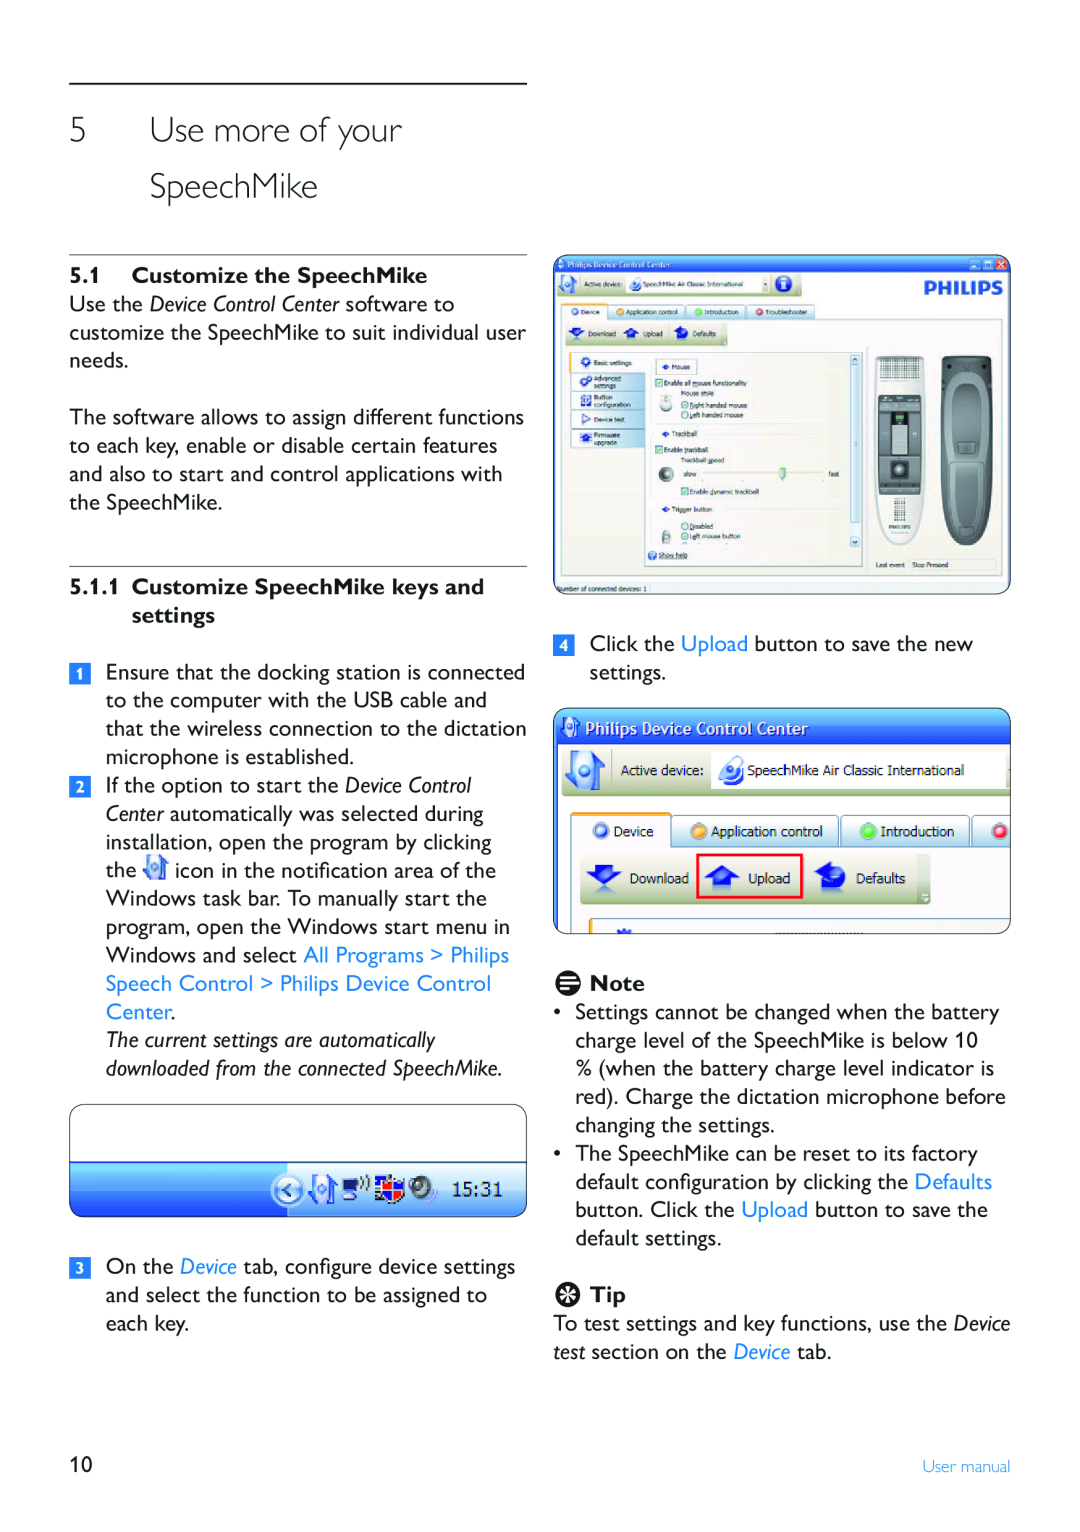 Philips LFH3200 user manual 5Use more of your SpeechMike, 5.1.1Customize SpeechMike keys and settings, DNote, ETip 